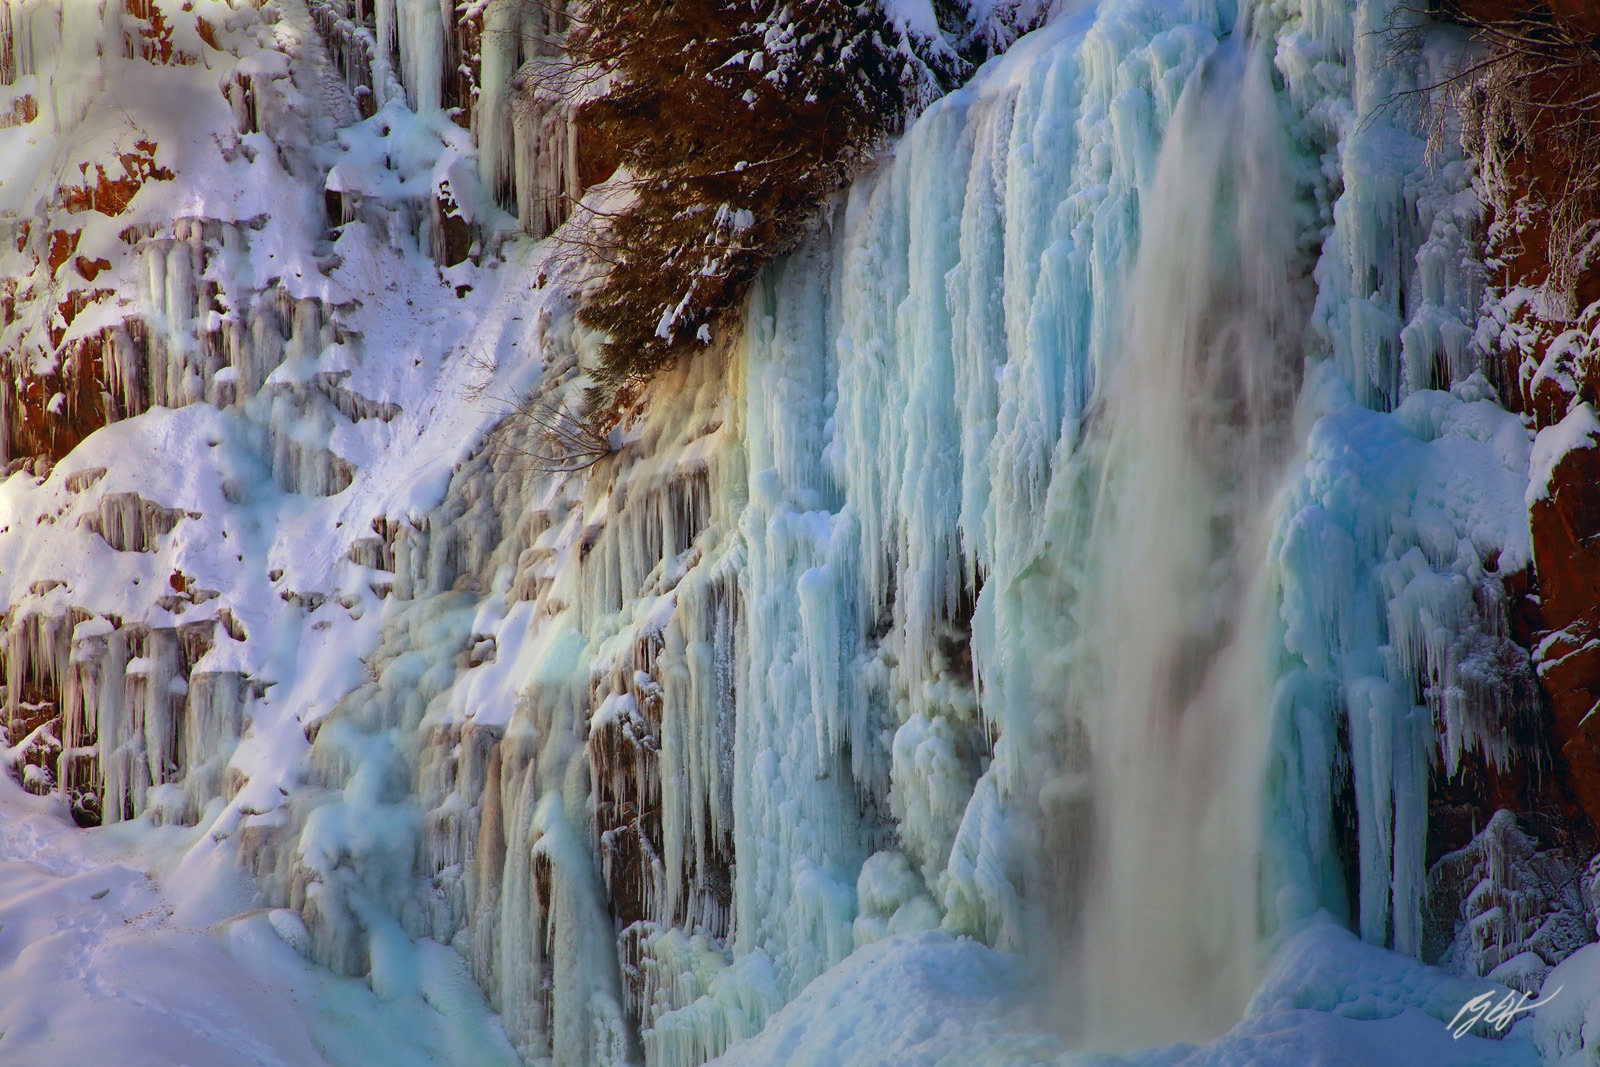 Franklin Falls Iced up in Winter in the Mt Baker-Snoqualmie National Forest in Washington State